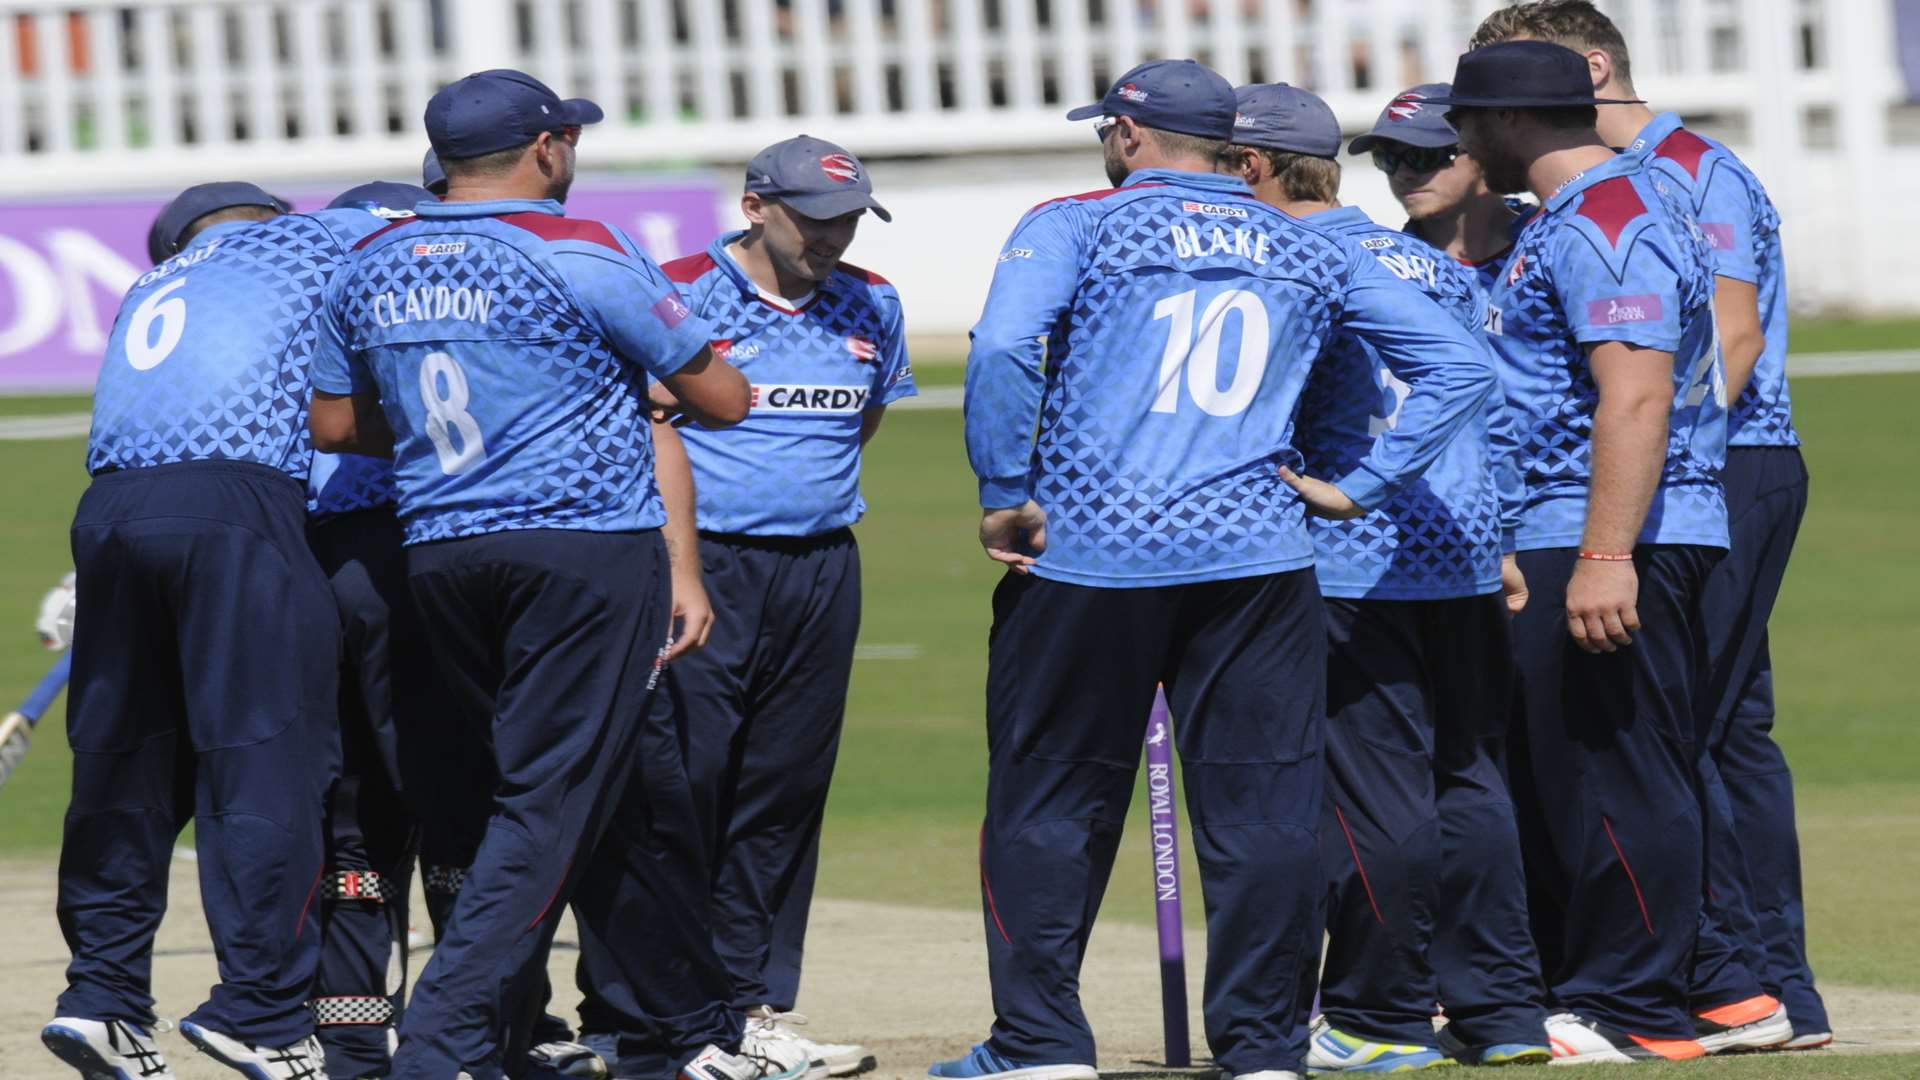 Kent celebrate a wicket in the group clash against Lancashire Picture: Tony Flashman